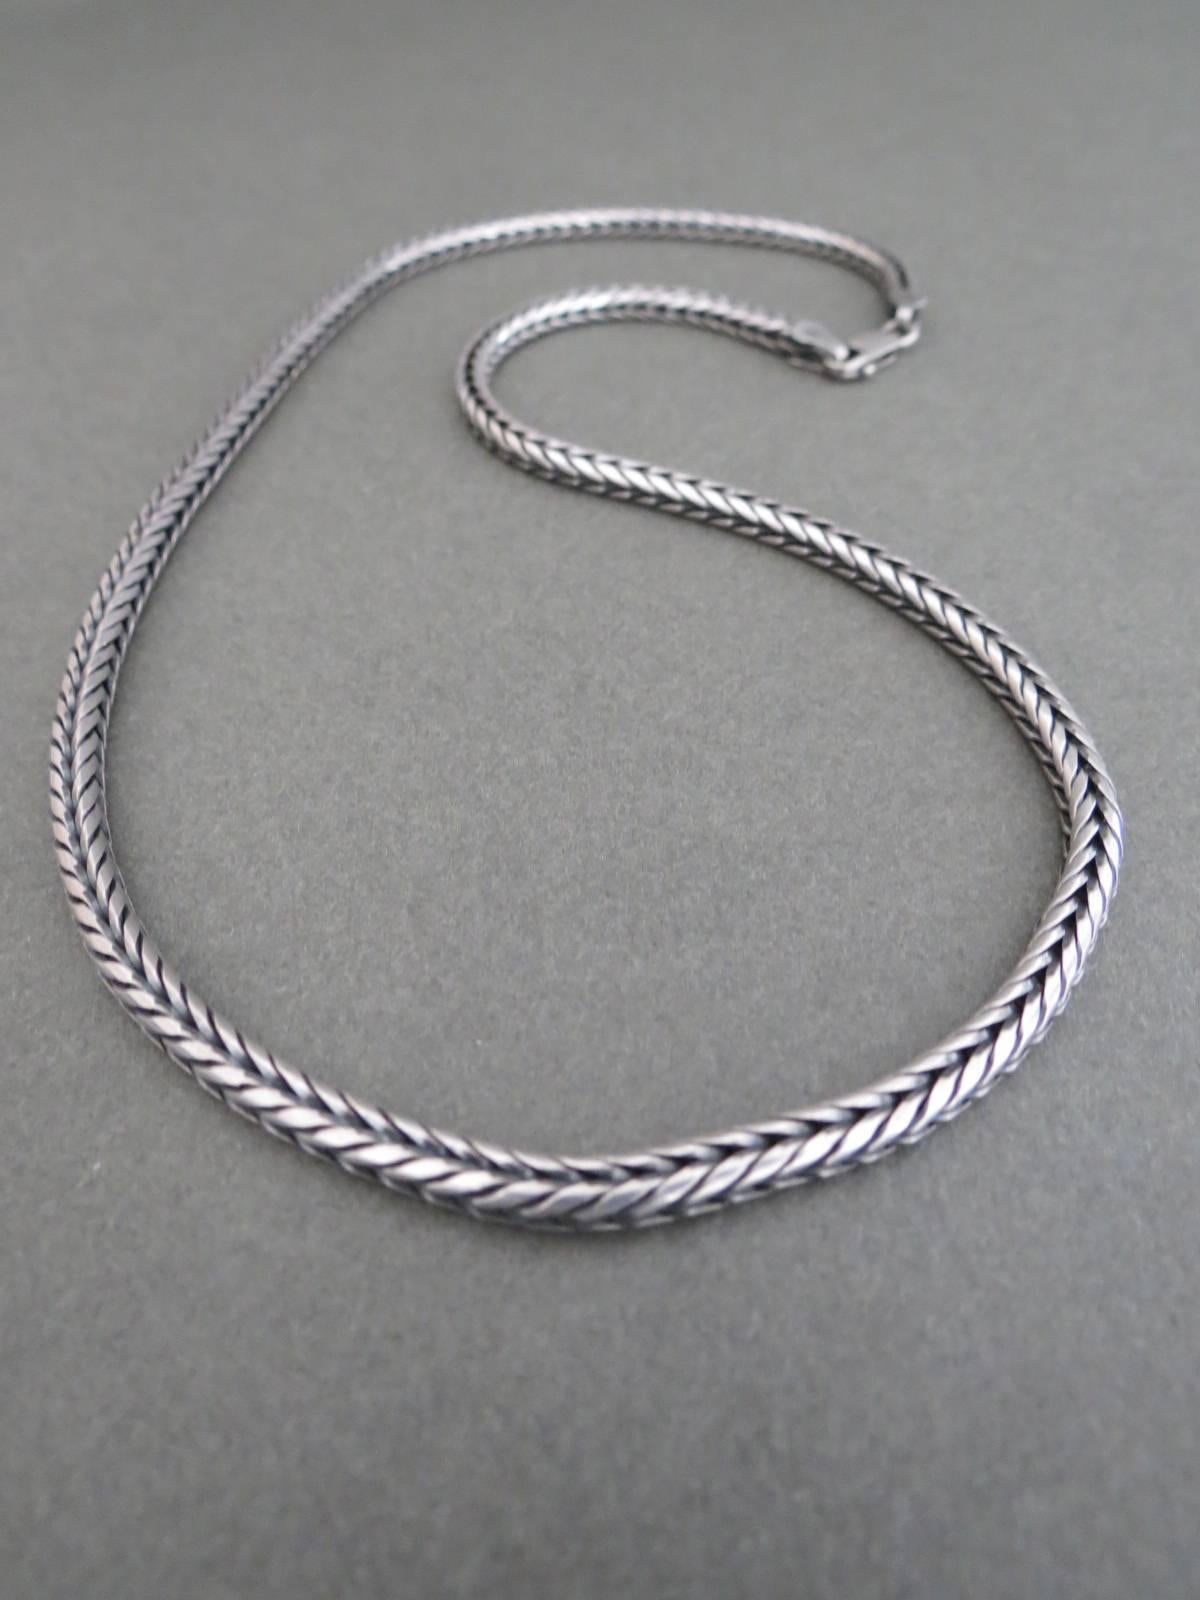 Vintage Sterling Silver Danish Snakeskin Necklace. Some age related ware , hallmarked.
Item Specifics
Length: 50cm (approx 19.50